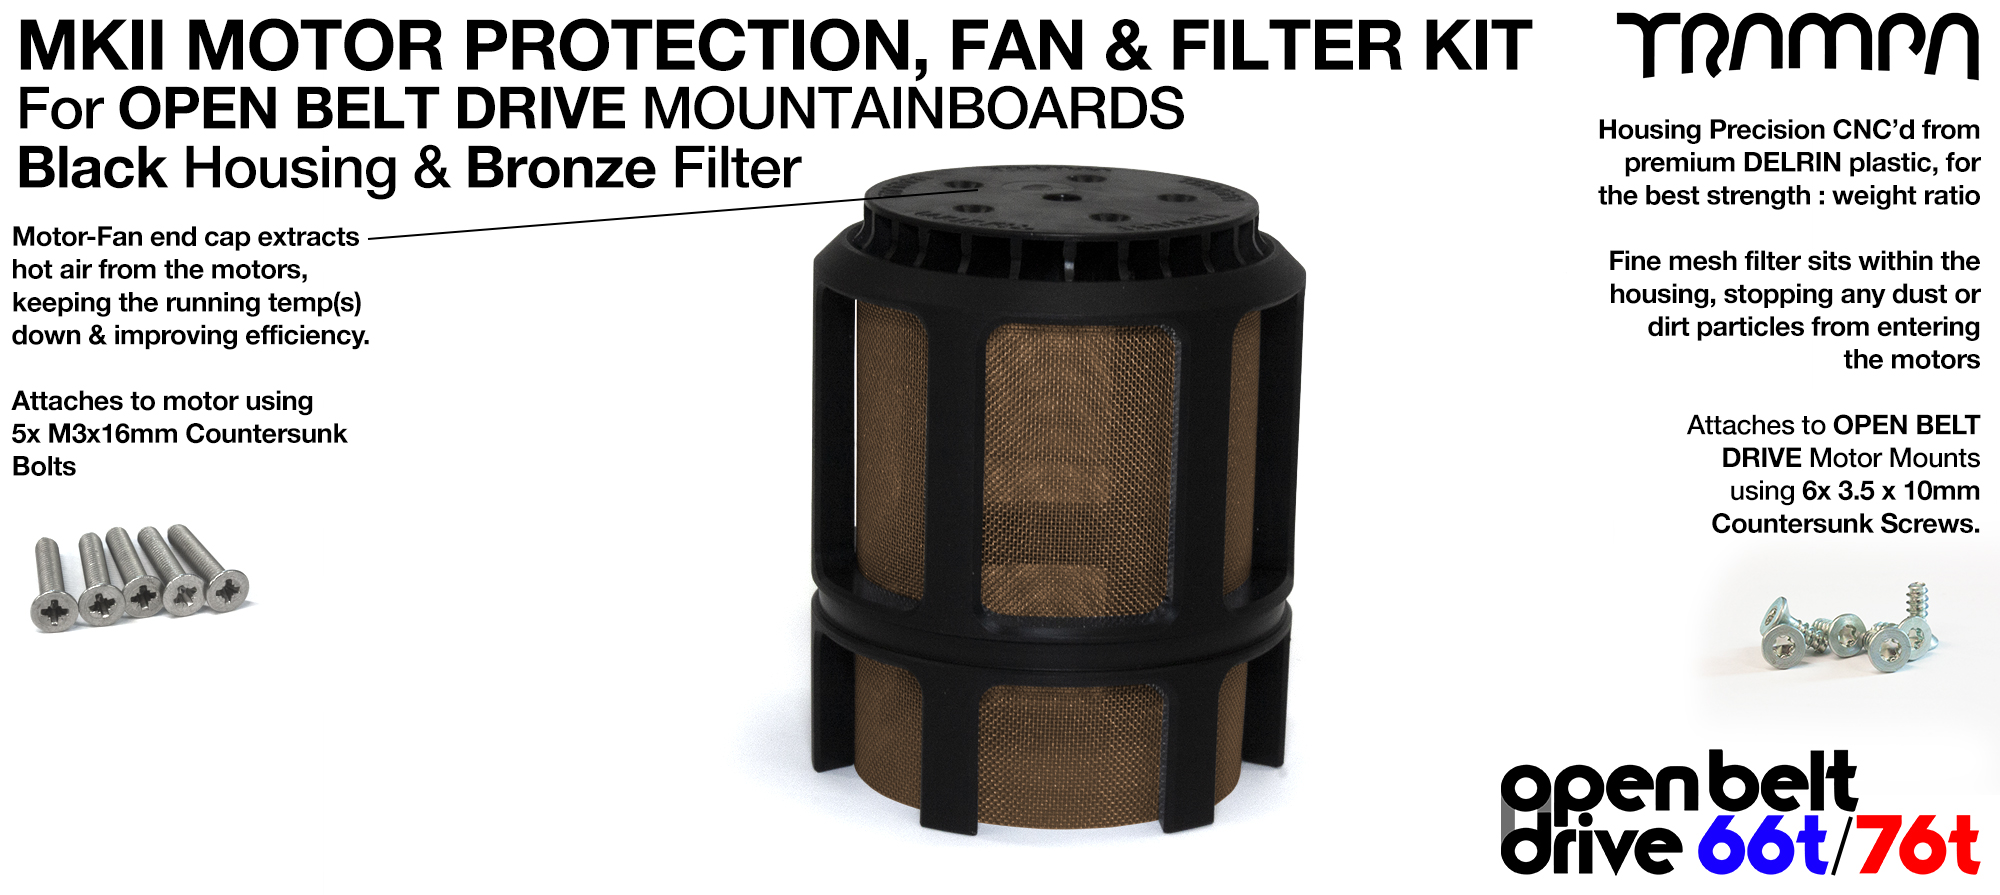 1x OBD MKII Motor protection Sleeve with BRONZE Filter 